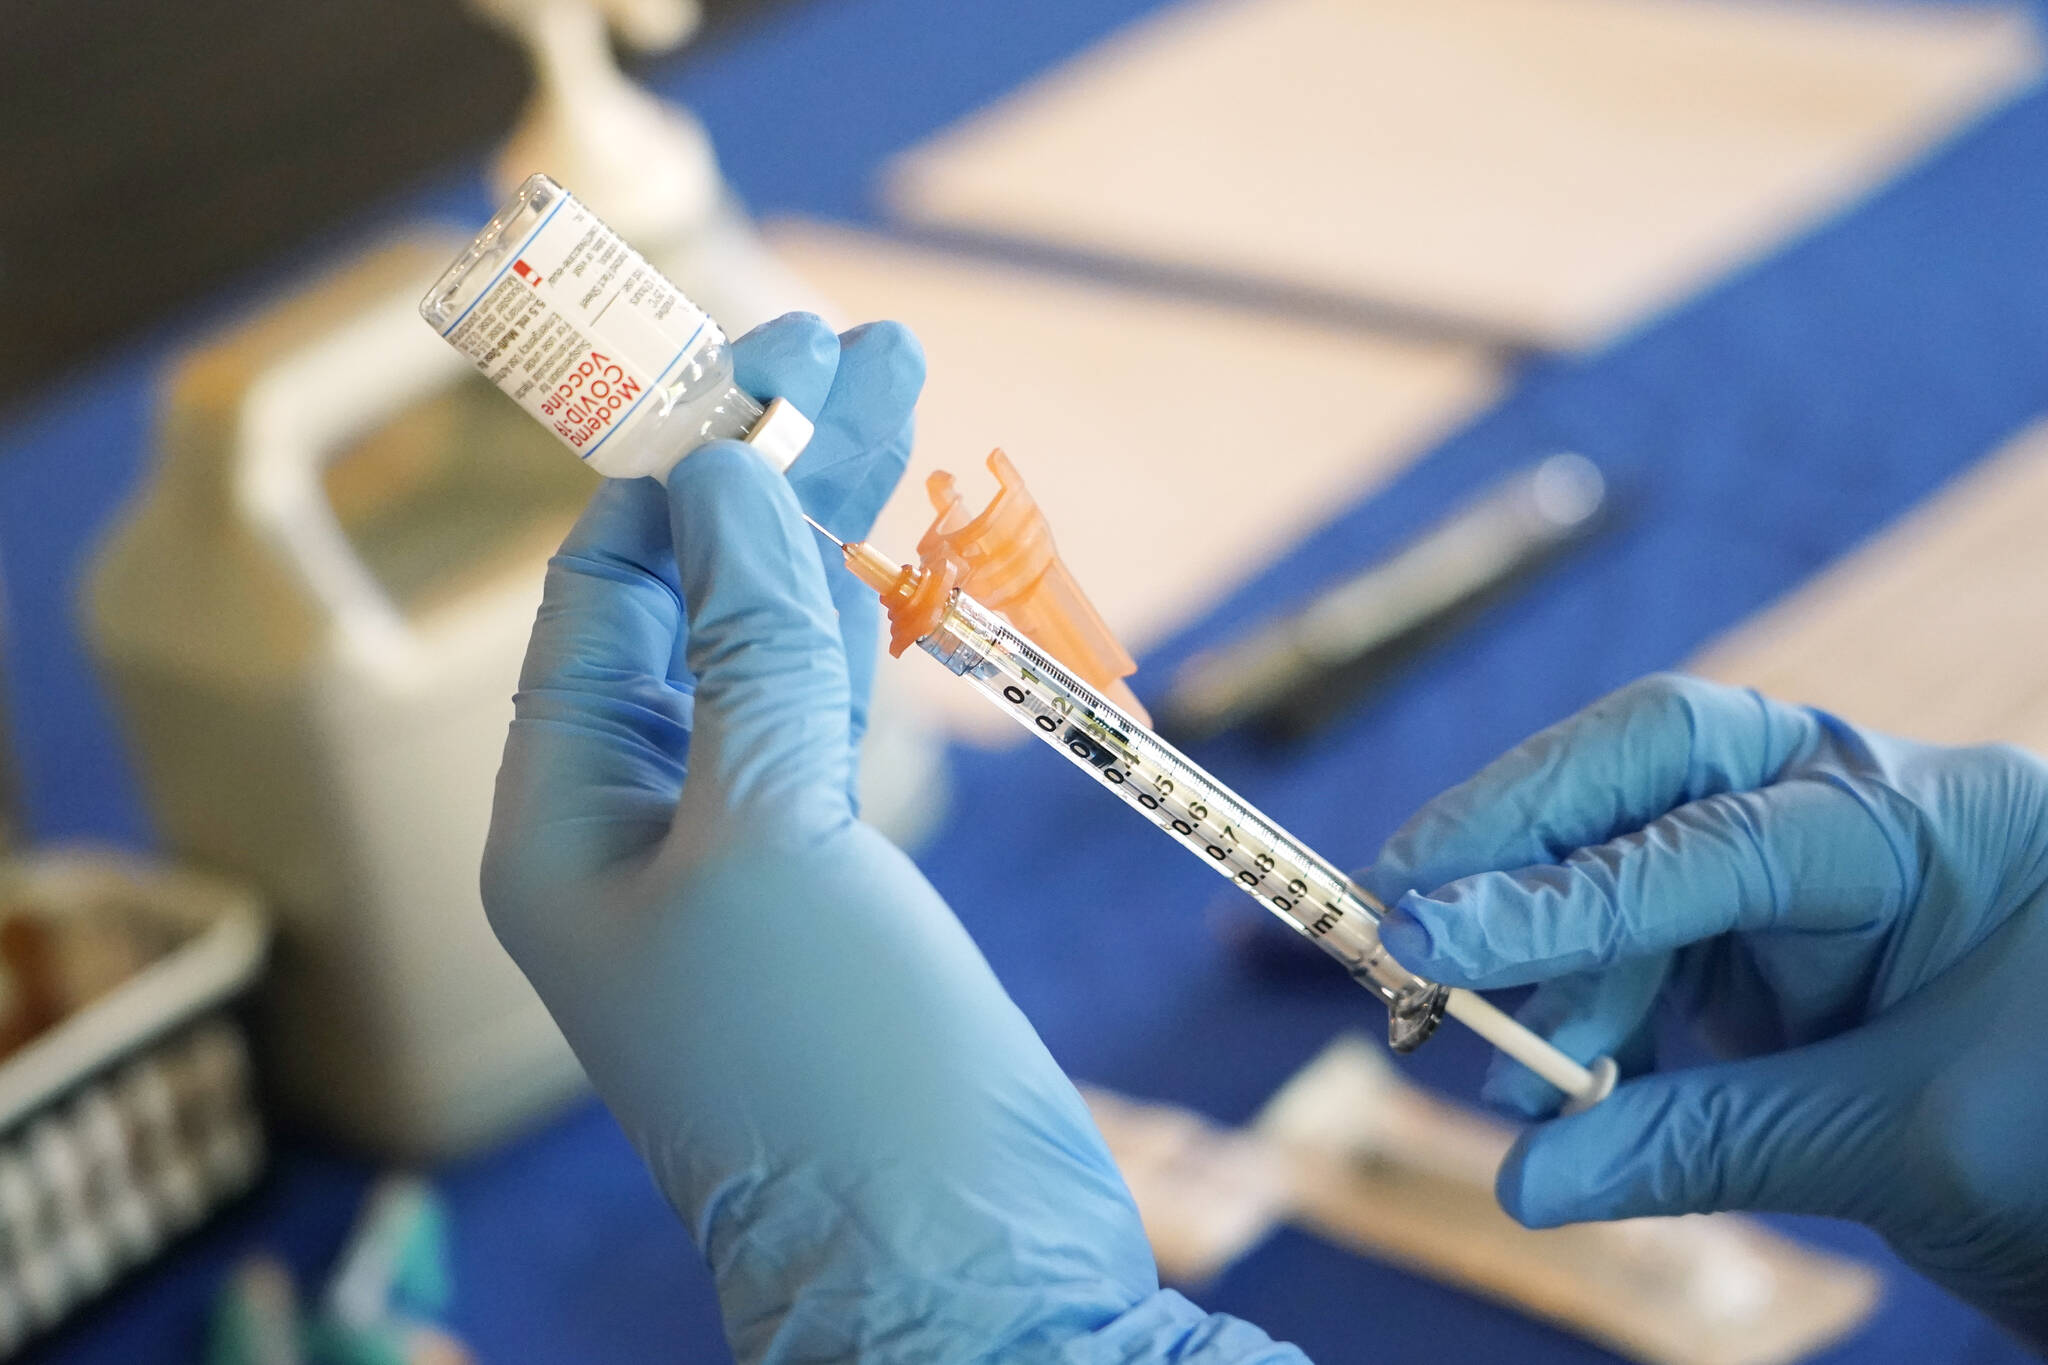 A nurse prepares a syringe of a COVID-19 vaccine at an inoculation station in Jackson, Miss., July 19, 2022. (AP Photo / Rogelio V. Solis)